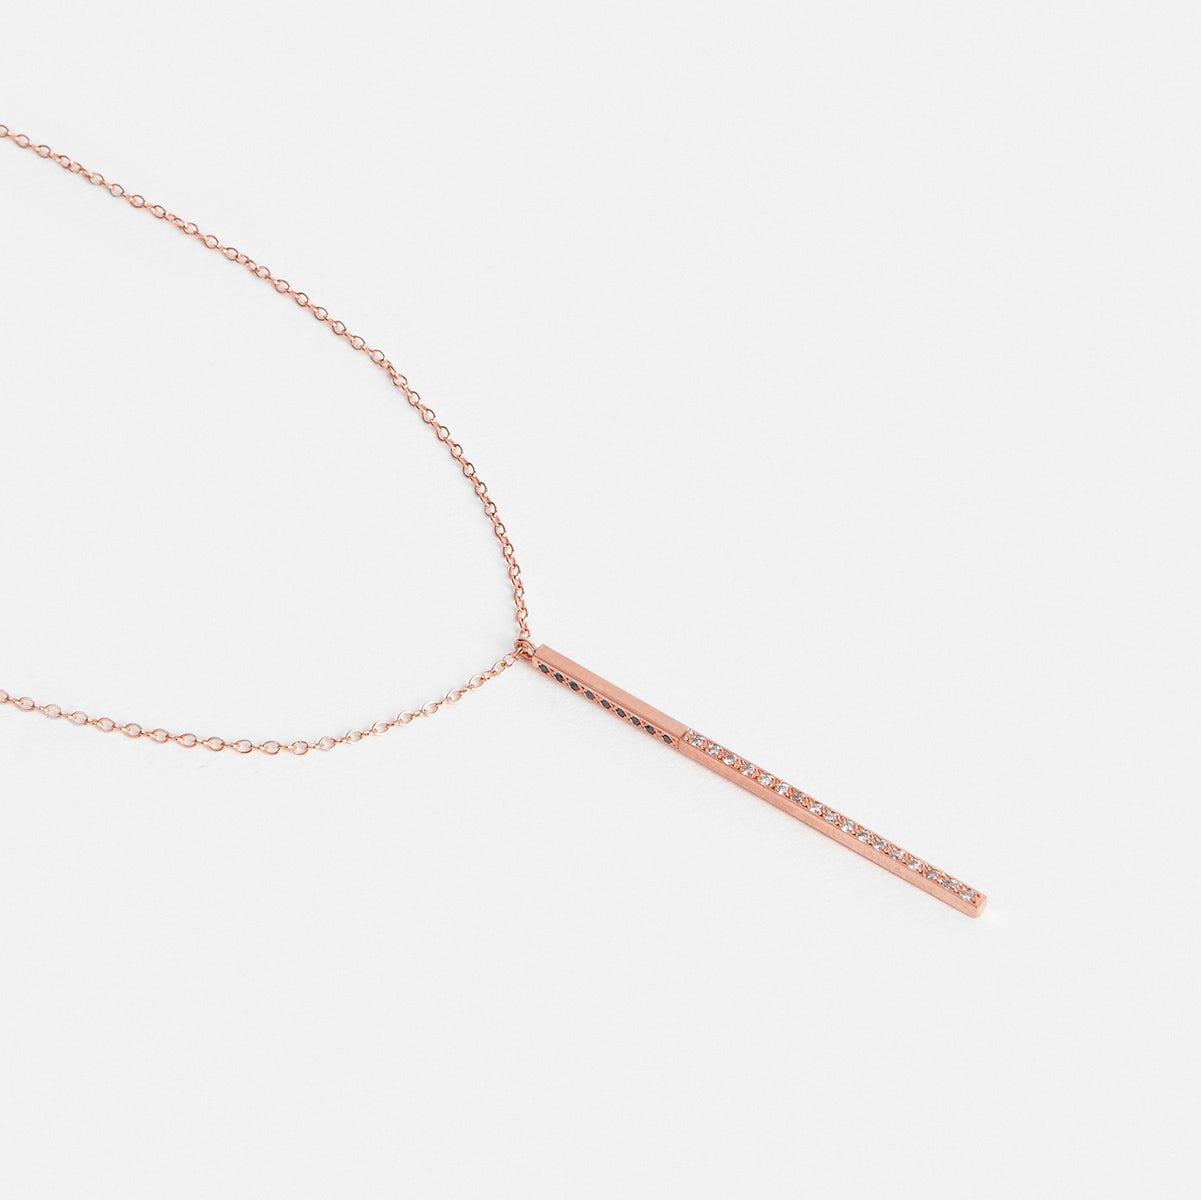 Tada Unusual Necklace in 14k Rose Gold set with Black and White Diamonds By SHW Fine Jewelry NYC